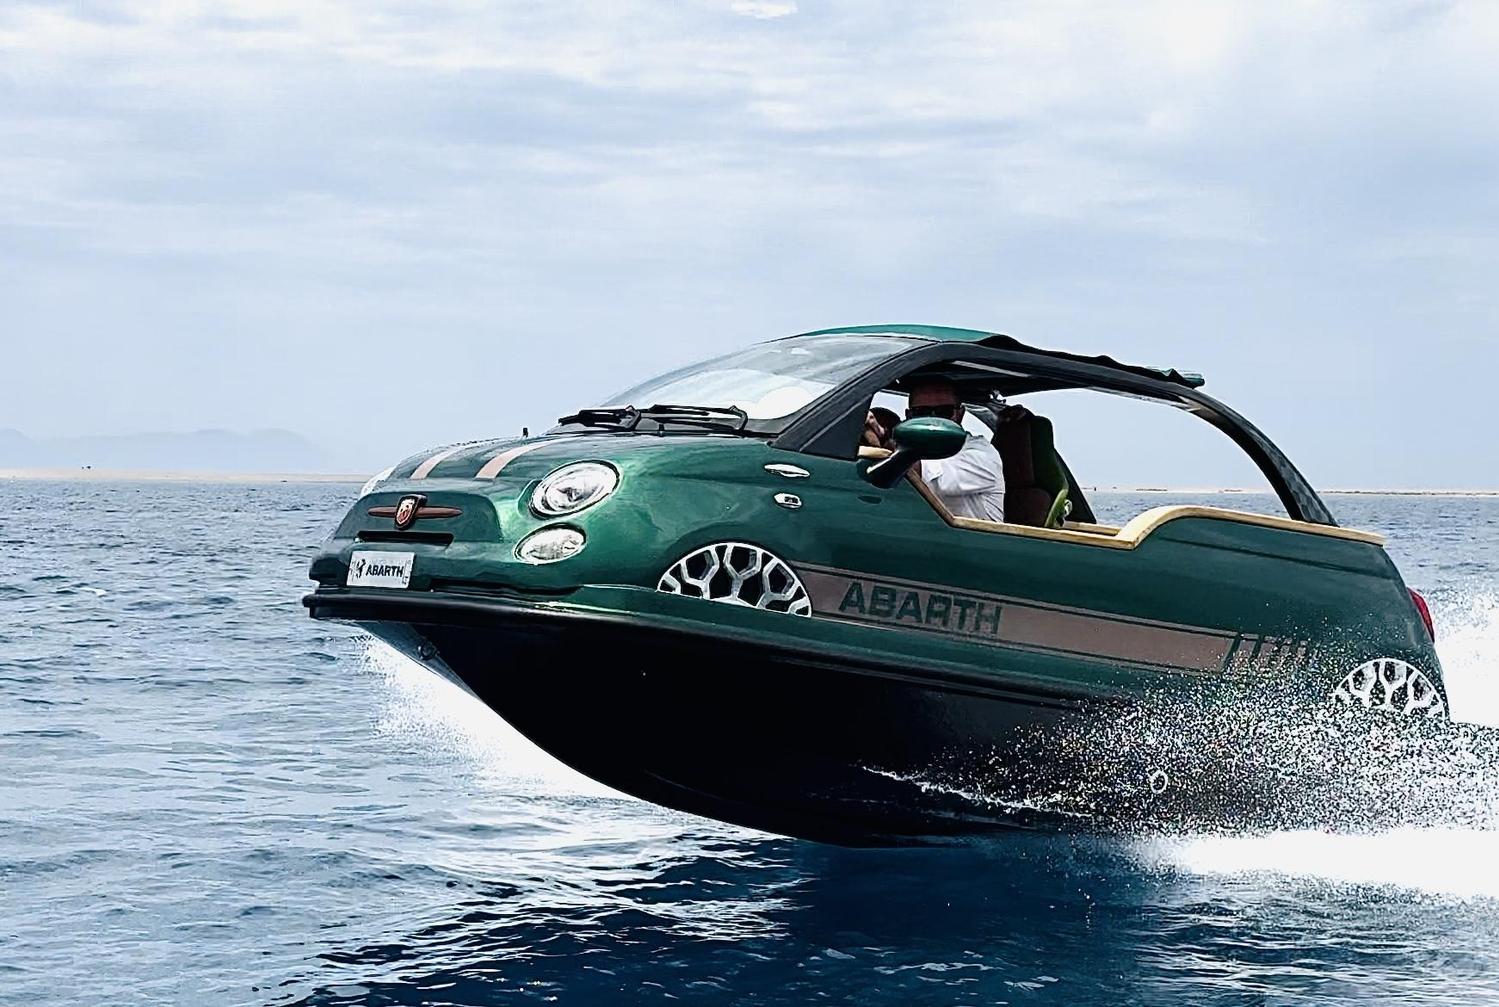 abarth offshore voiture bateau